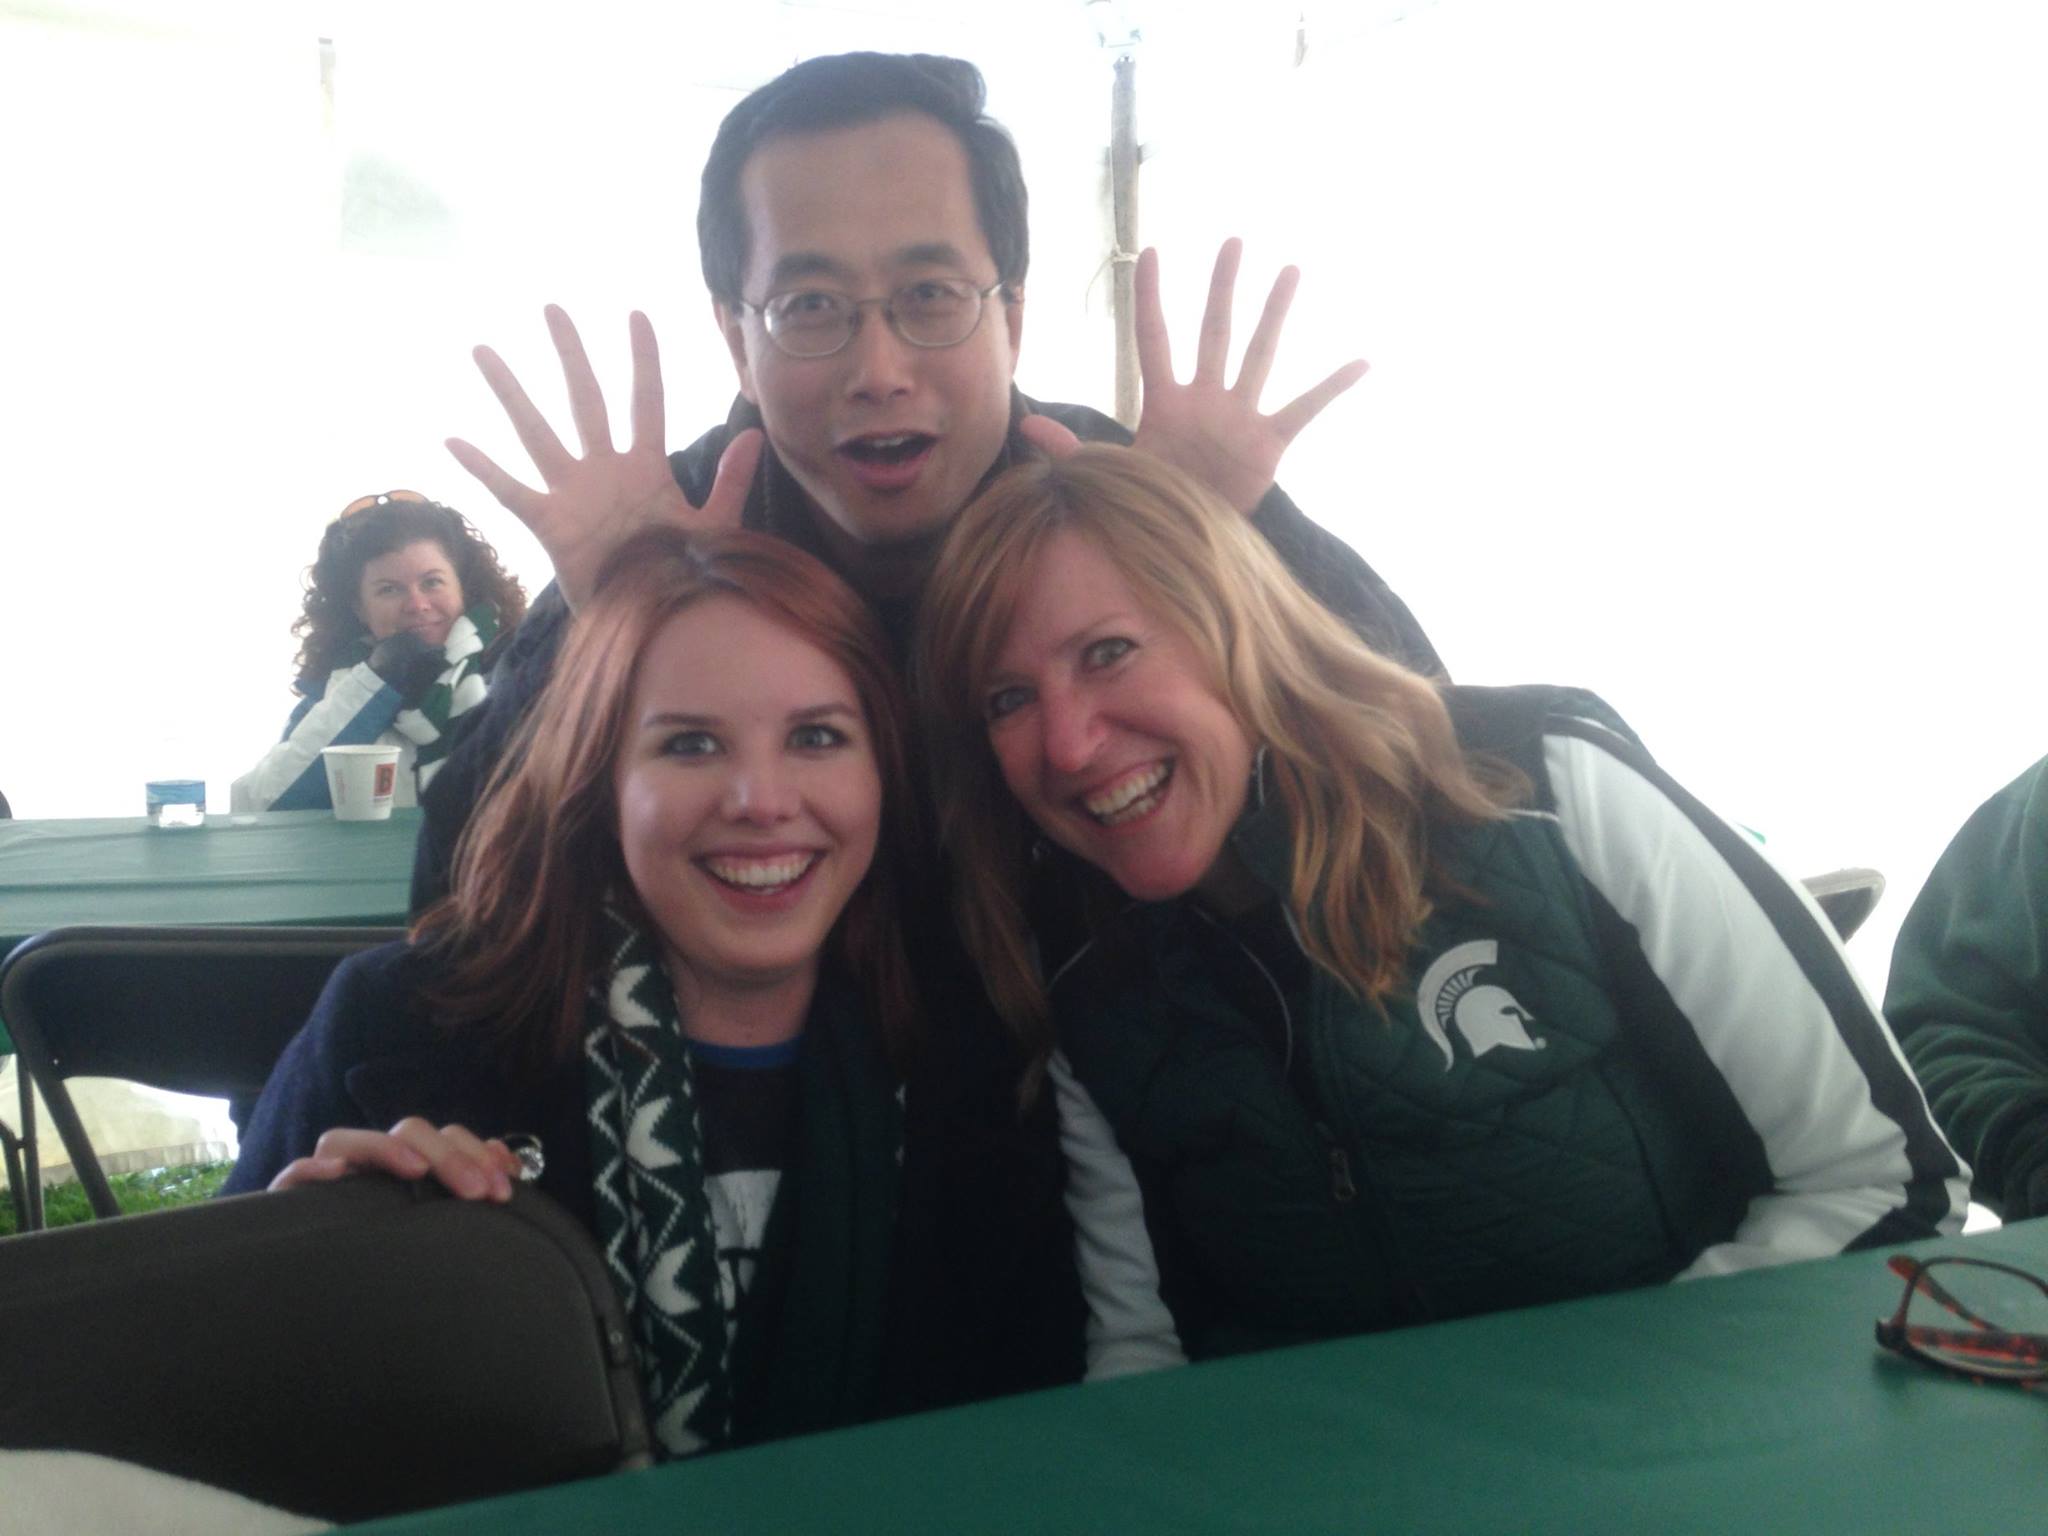 Wishing Marcy Heberer happy trails after 14 years with MSU